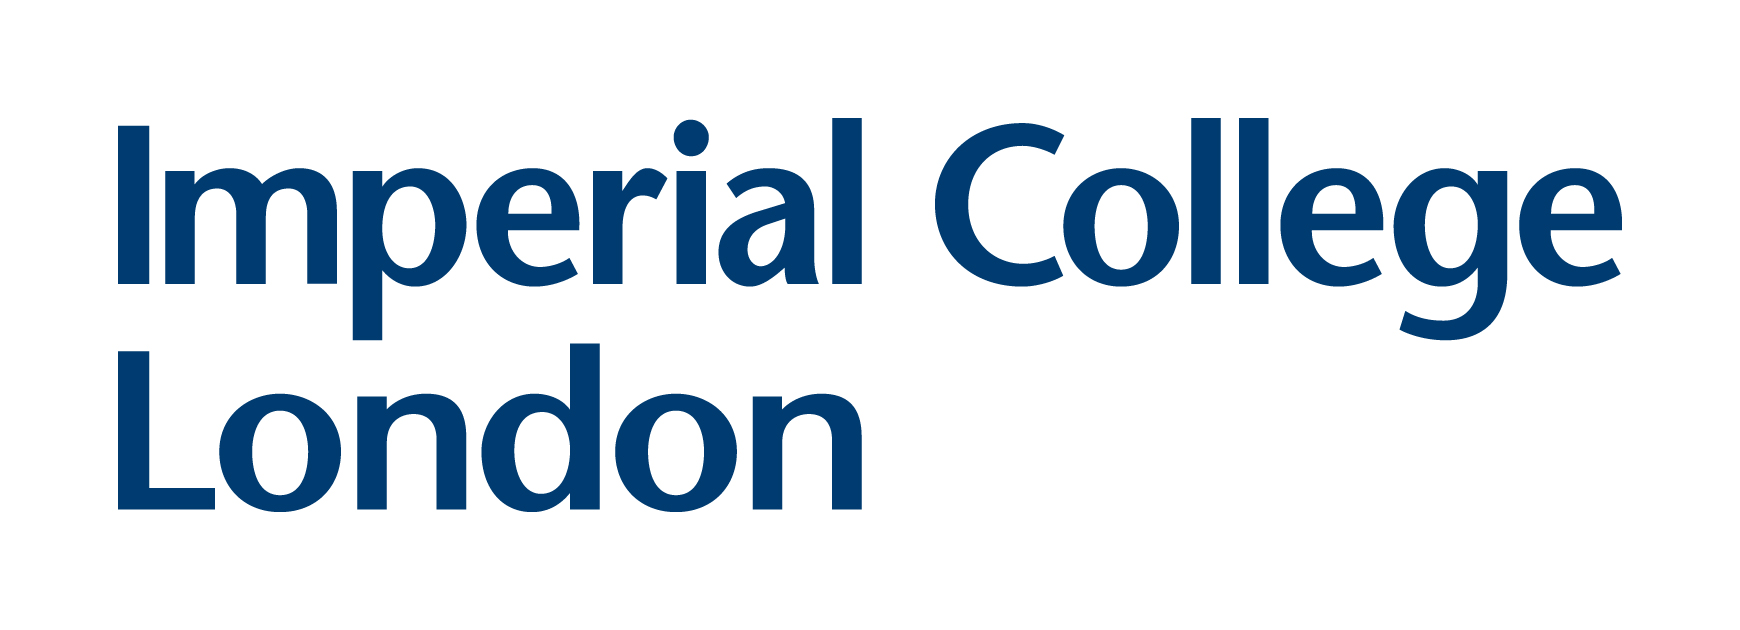 Imperial College London logo - click on this to take you to the Equality, Diversity and inclusion pages.